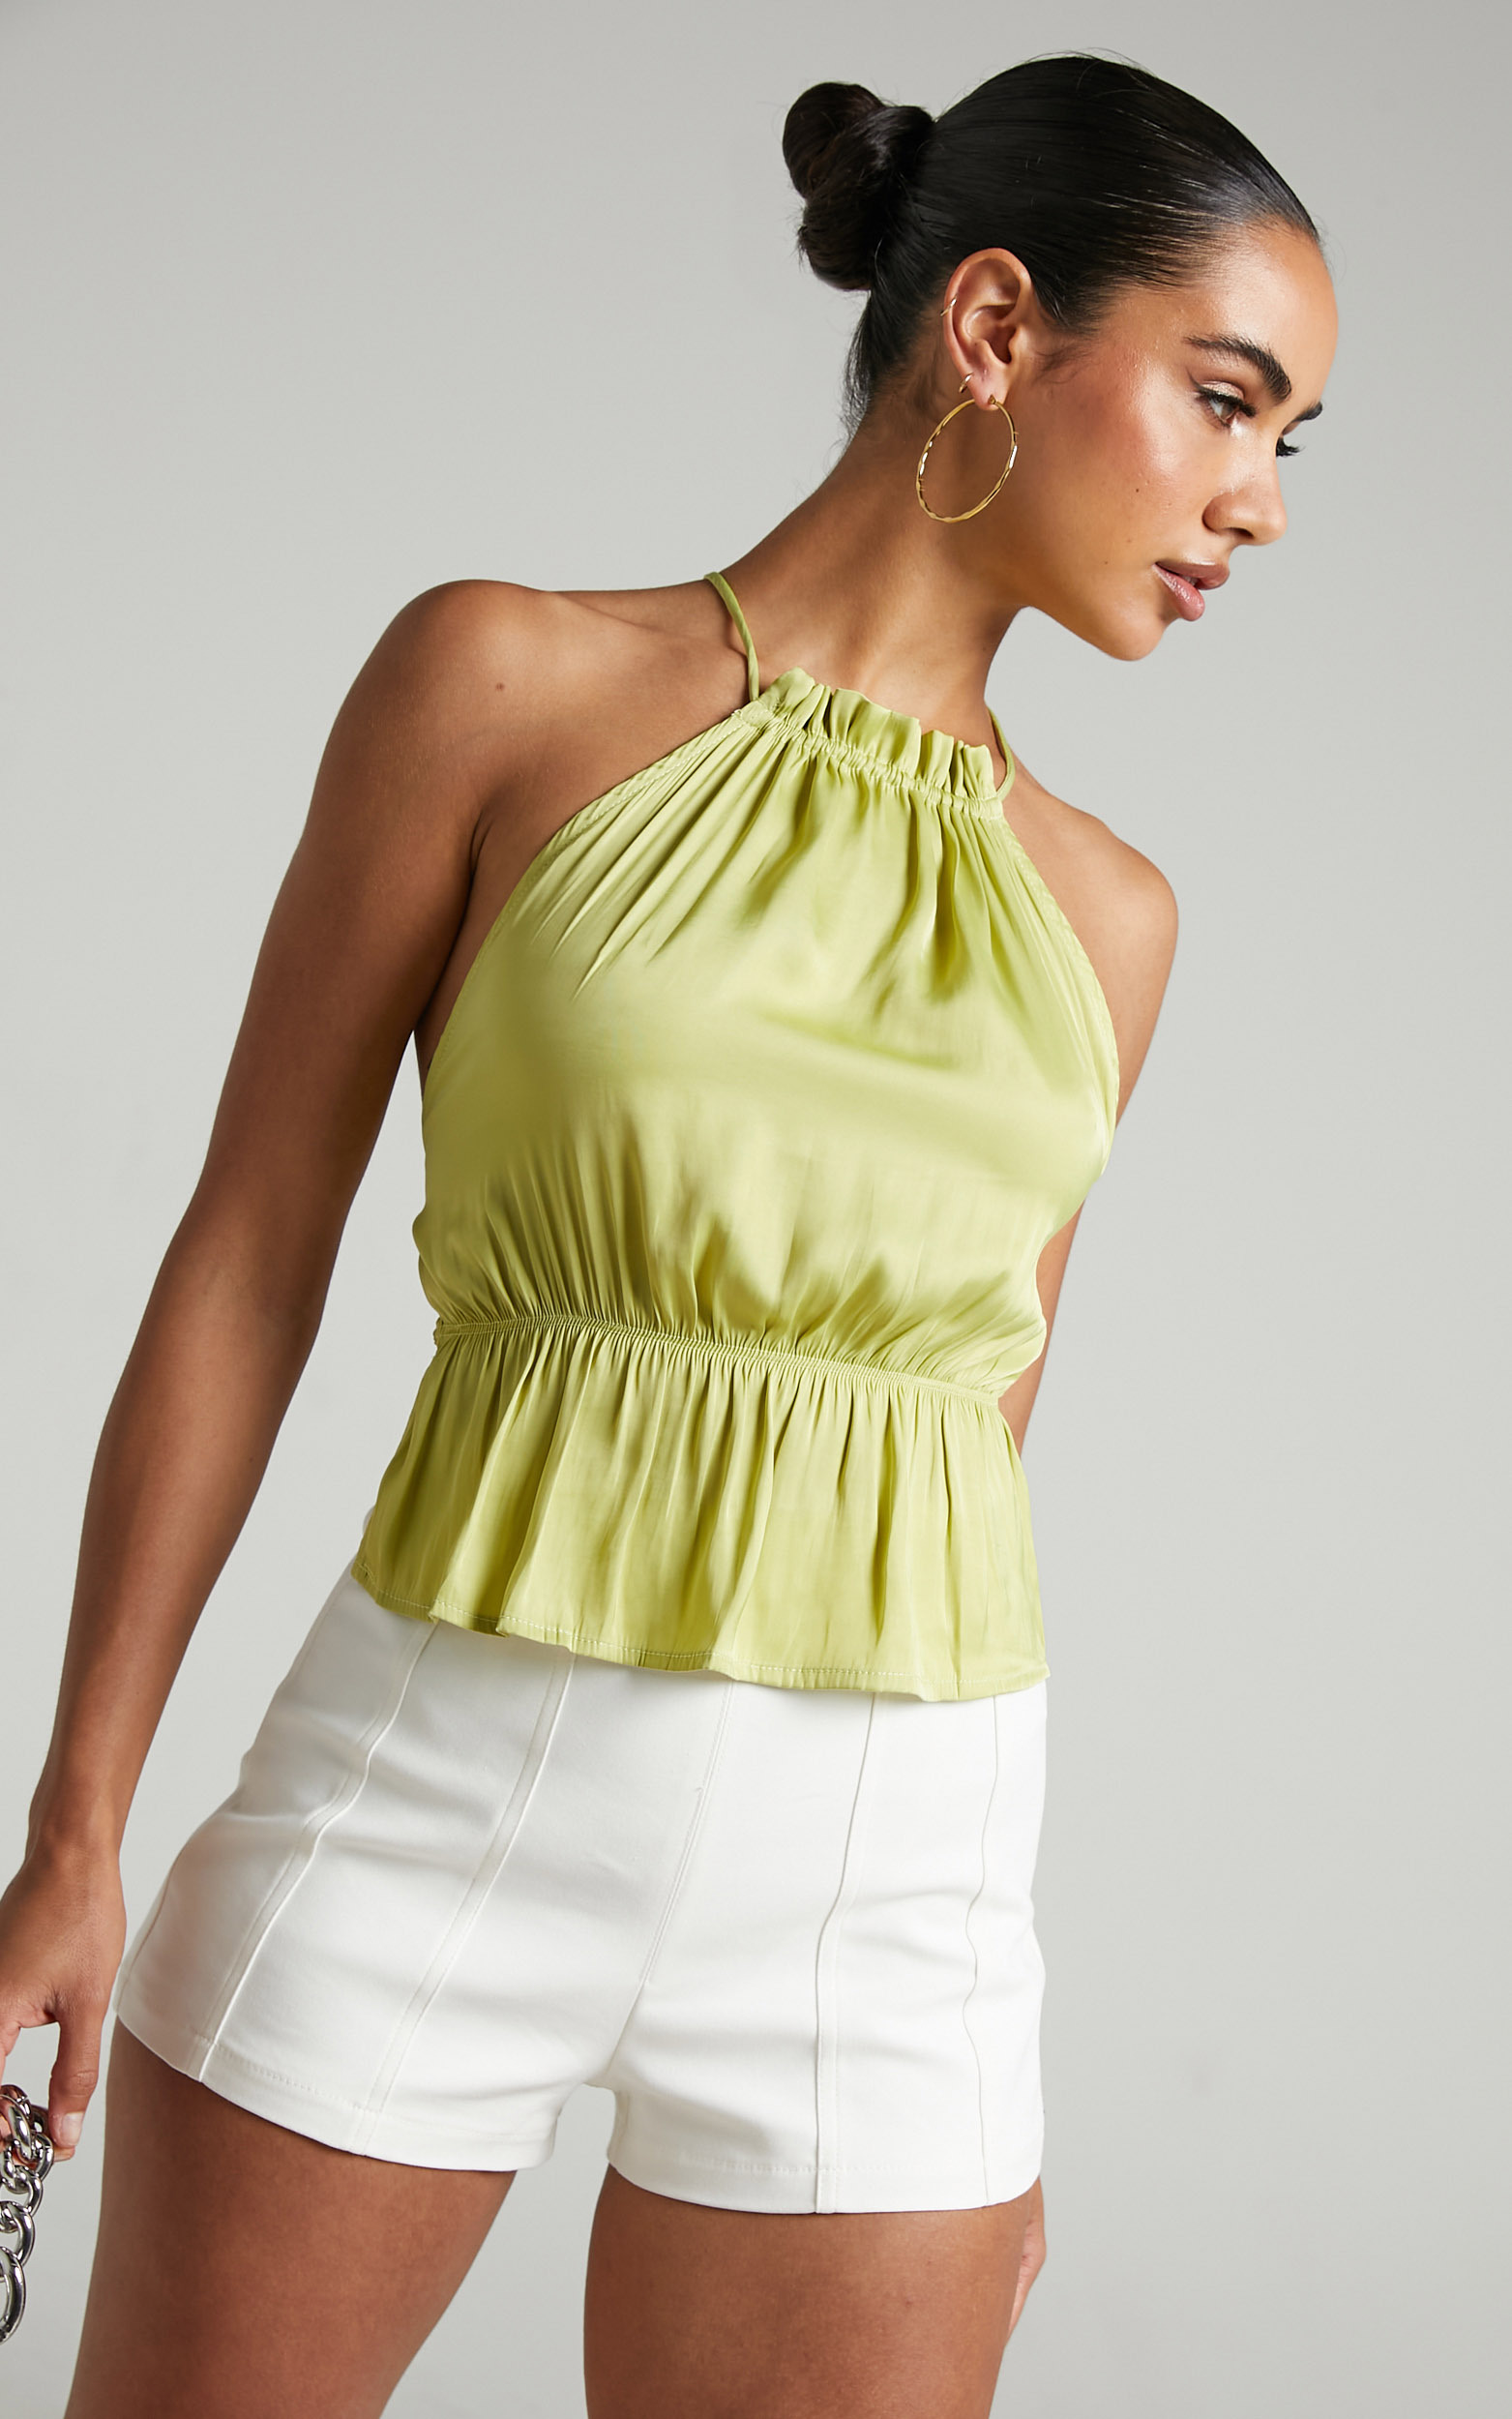 Pamela Peplum Top with Tie Up Back in Lime - 06, GRN1, hi-res image number null